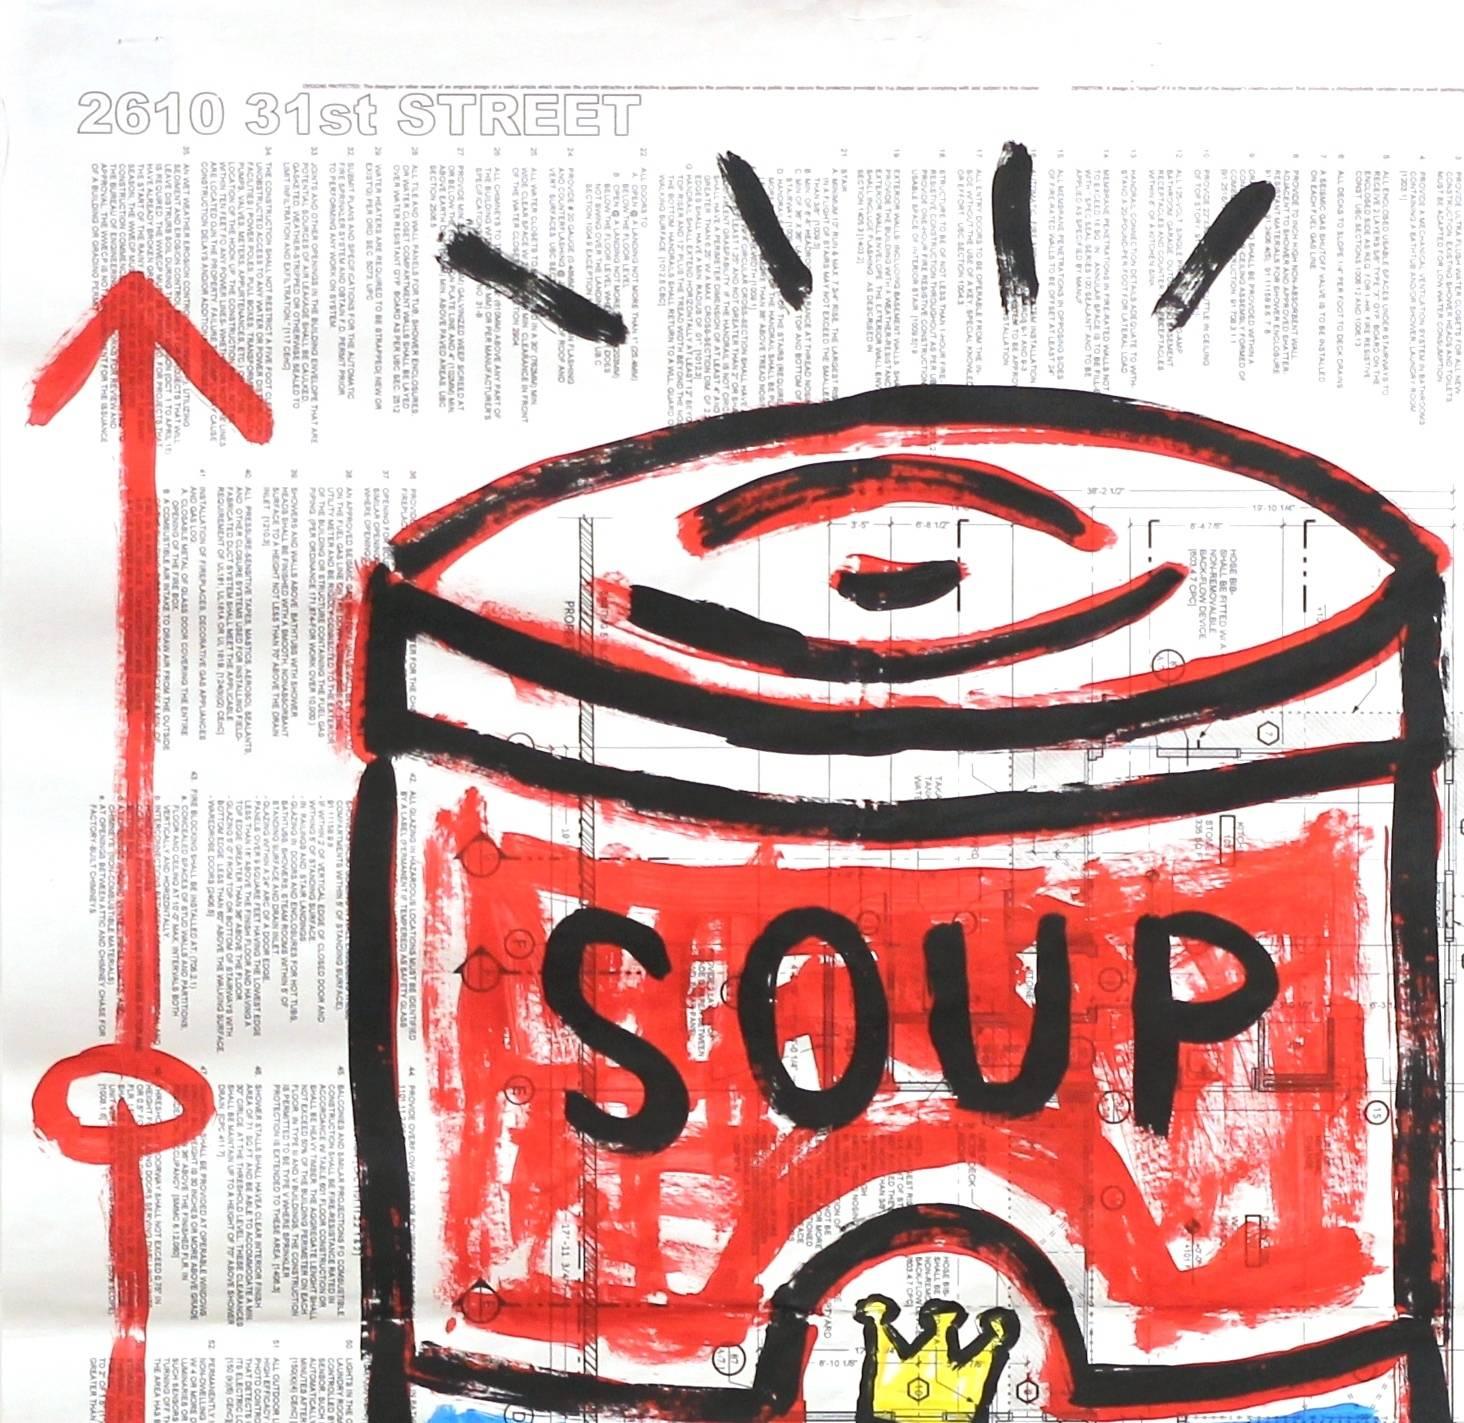 Soup's Up - Painting by Gary John